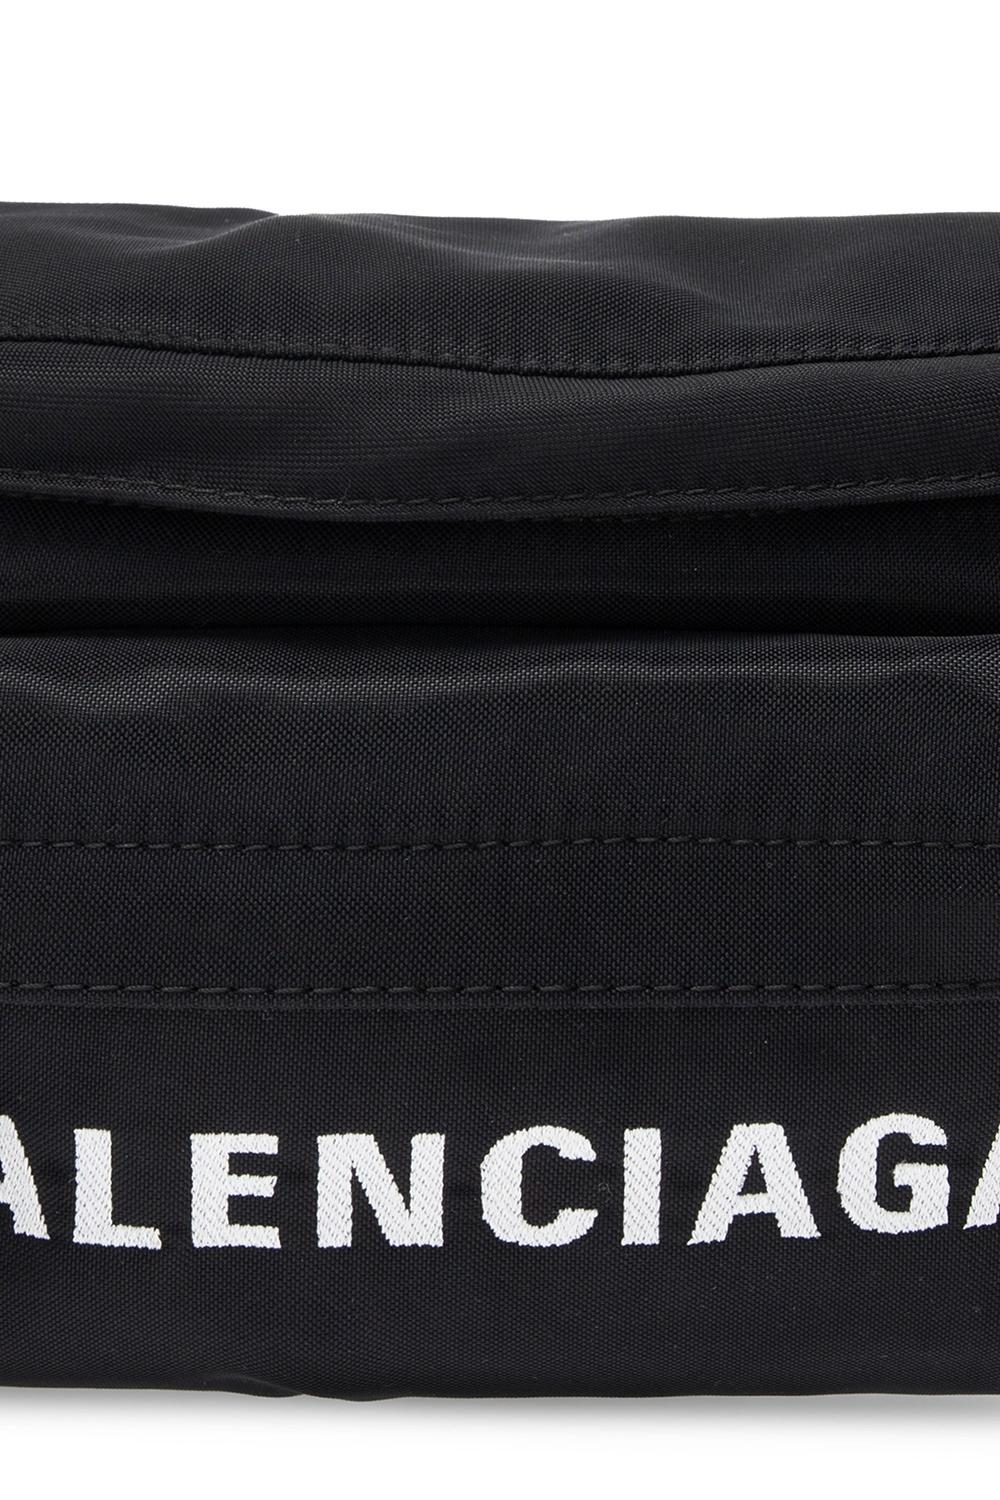 Balenciaga Synthetic Everyday Beltpack in Black for Men | Lyst